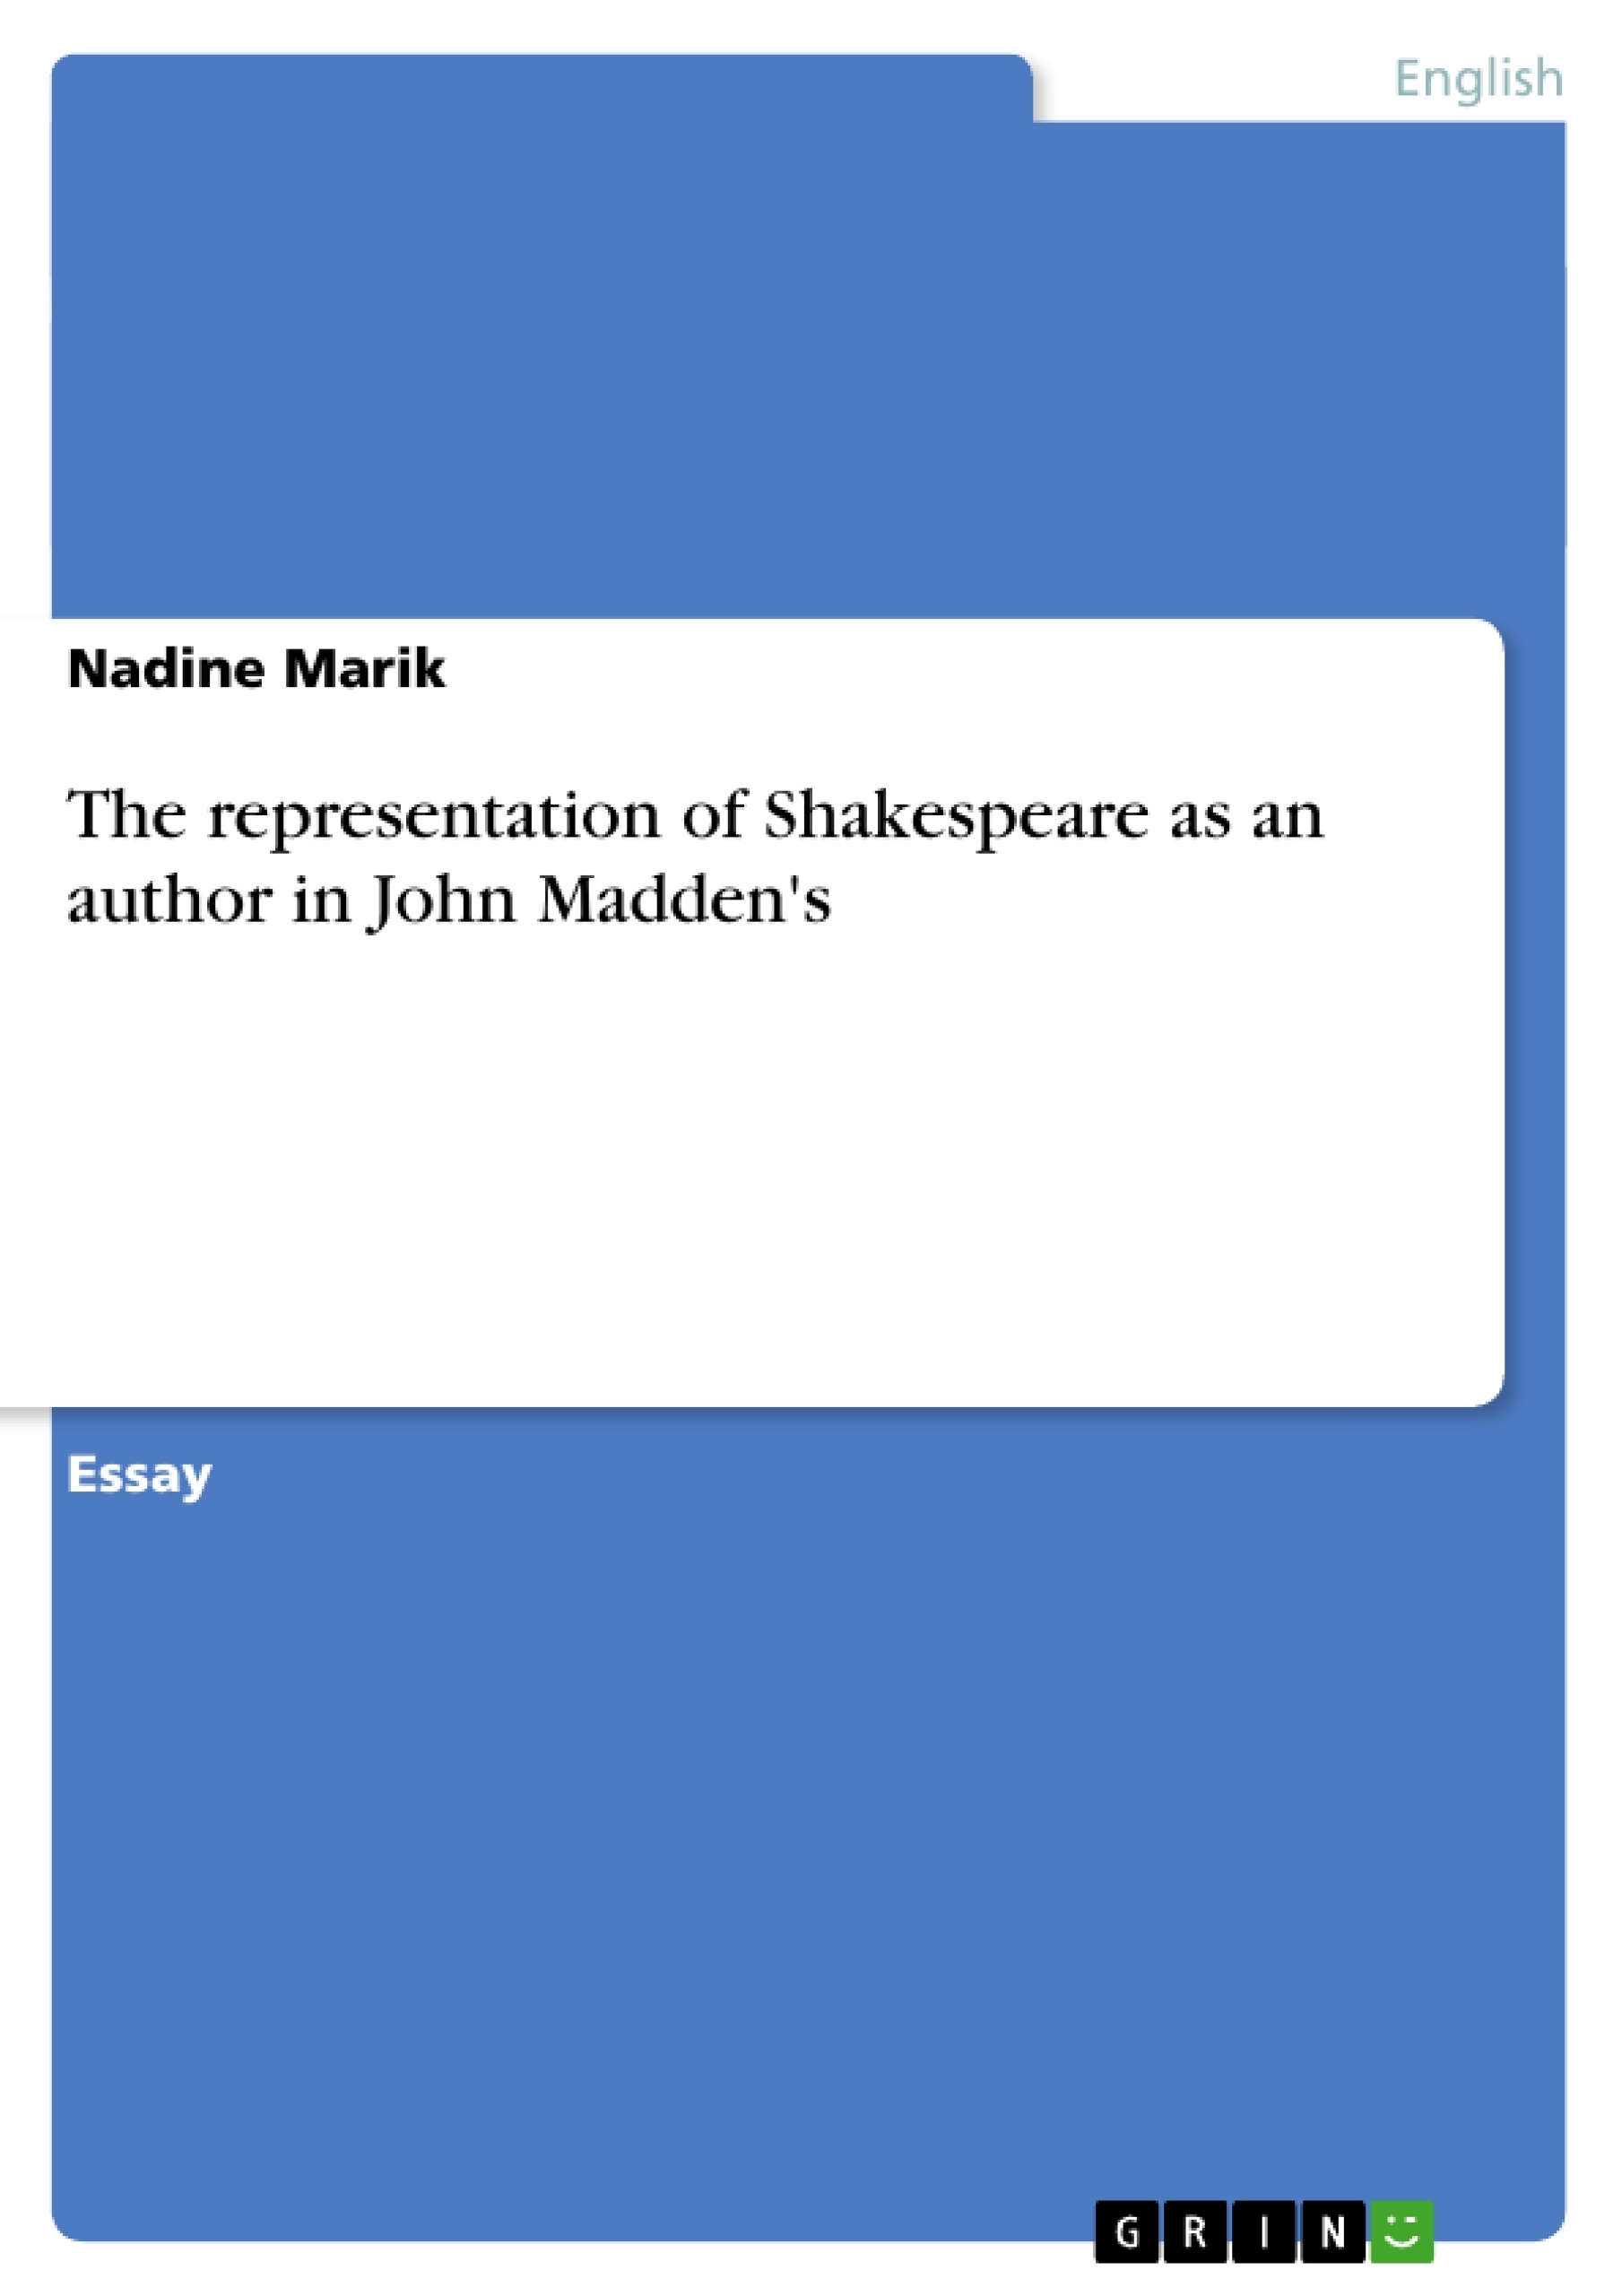 Título: The representation of Shakespeare as an author in John Madden's